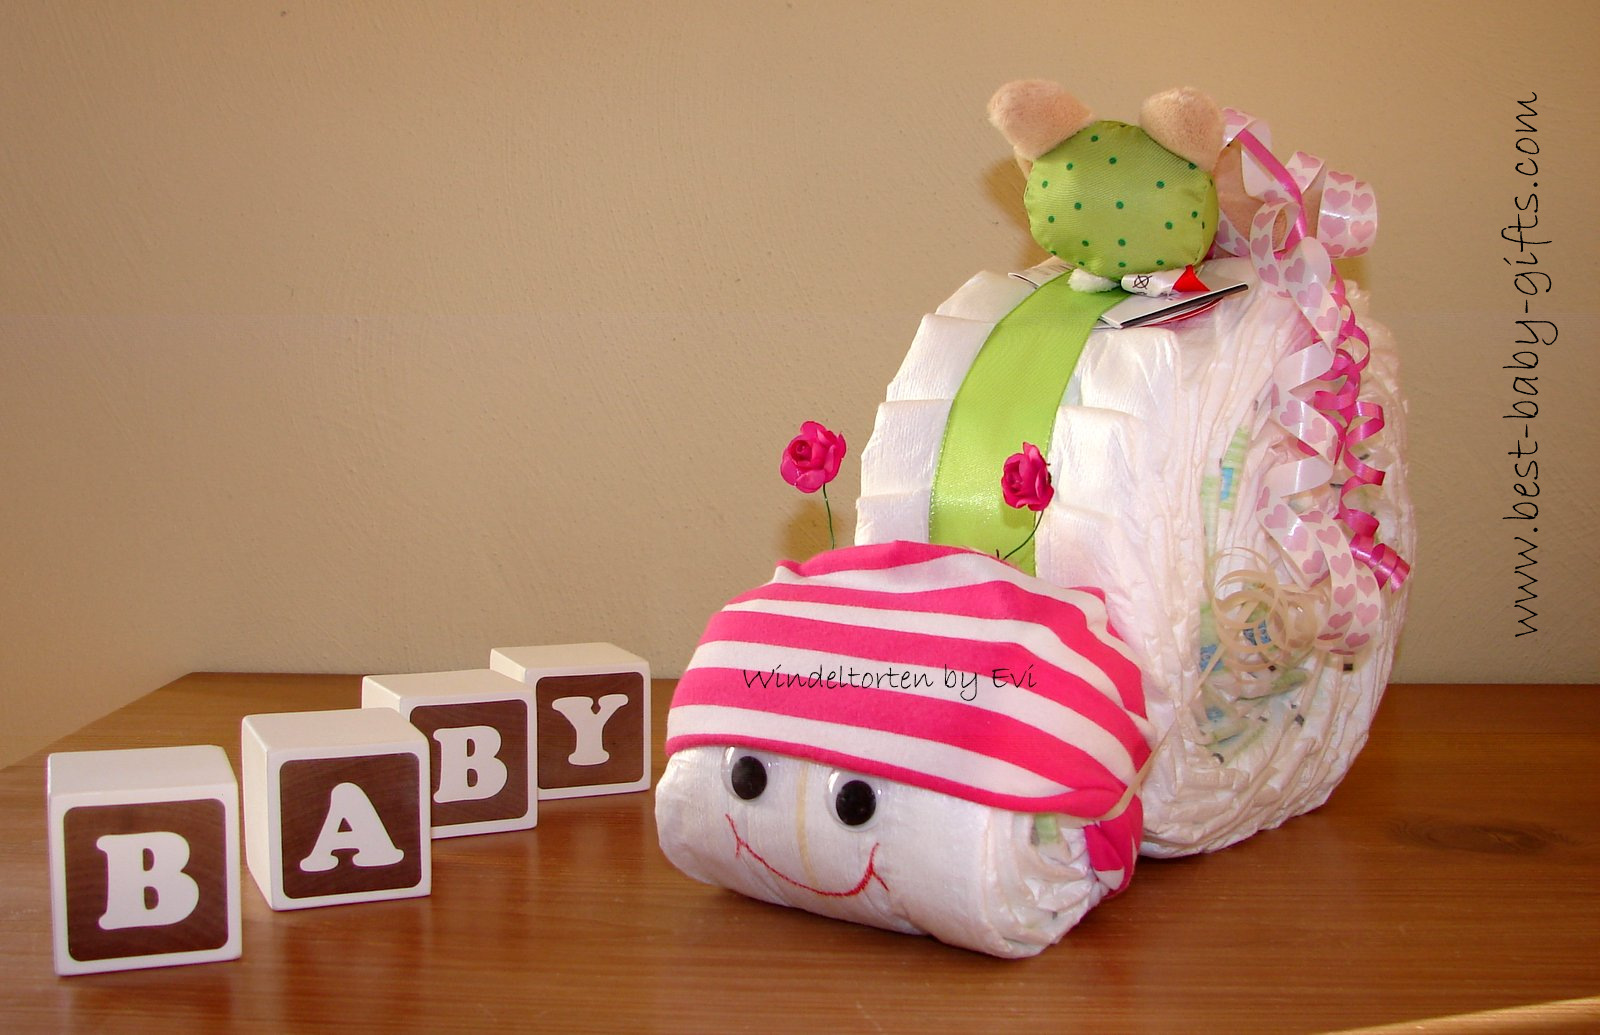 Homemade Baby Shower Gifts ... make a special DIY newborn gift